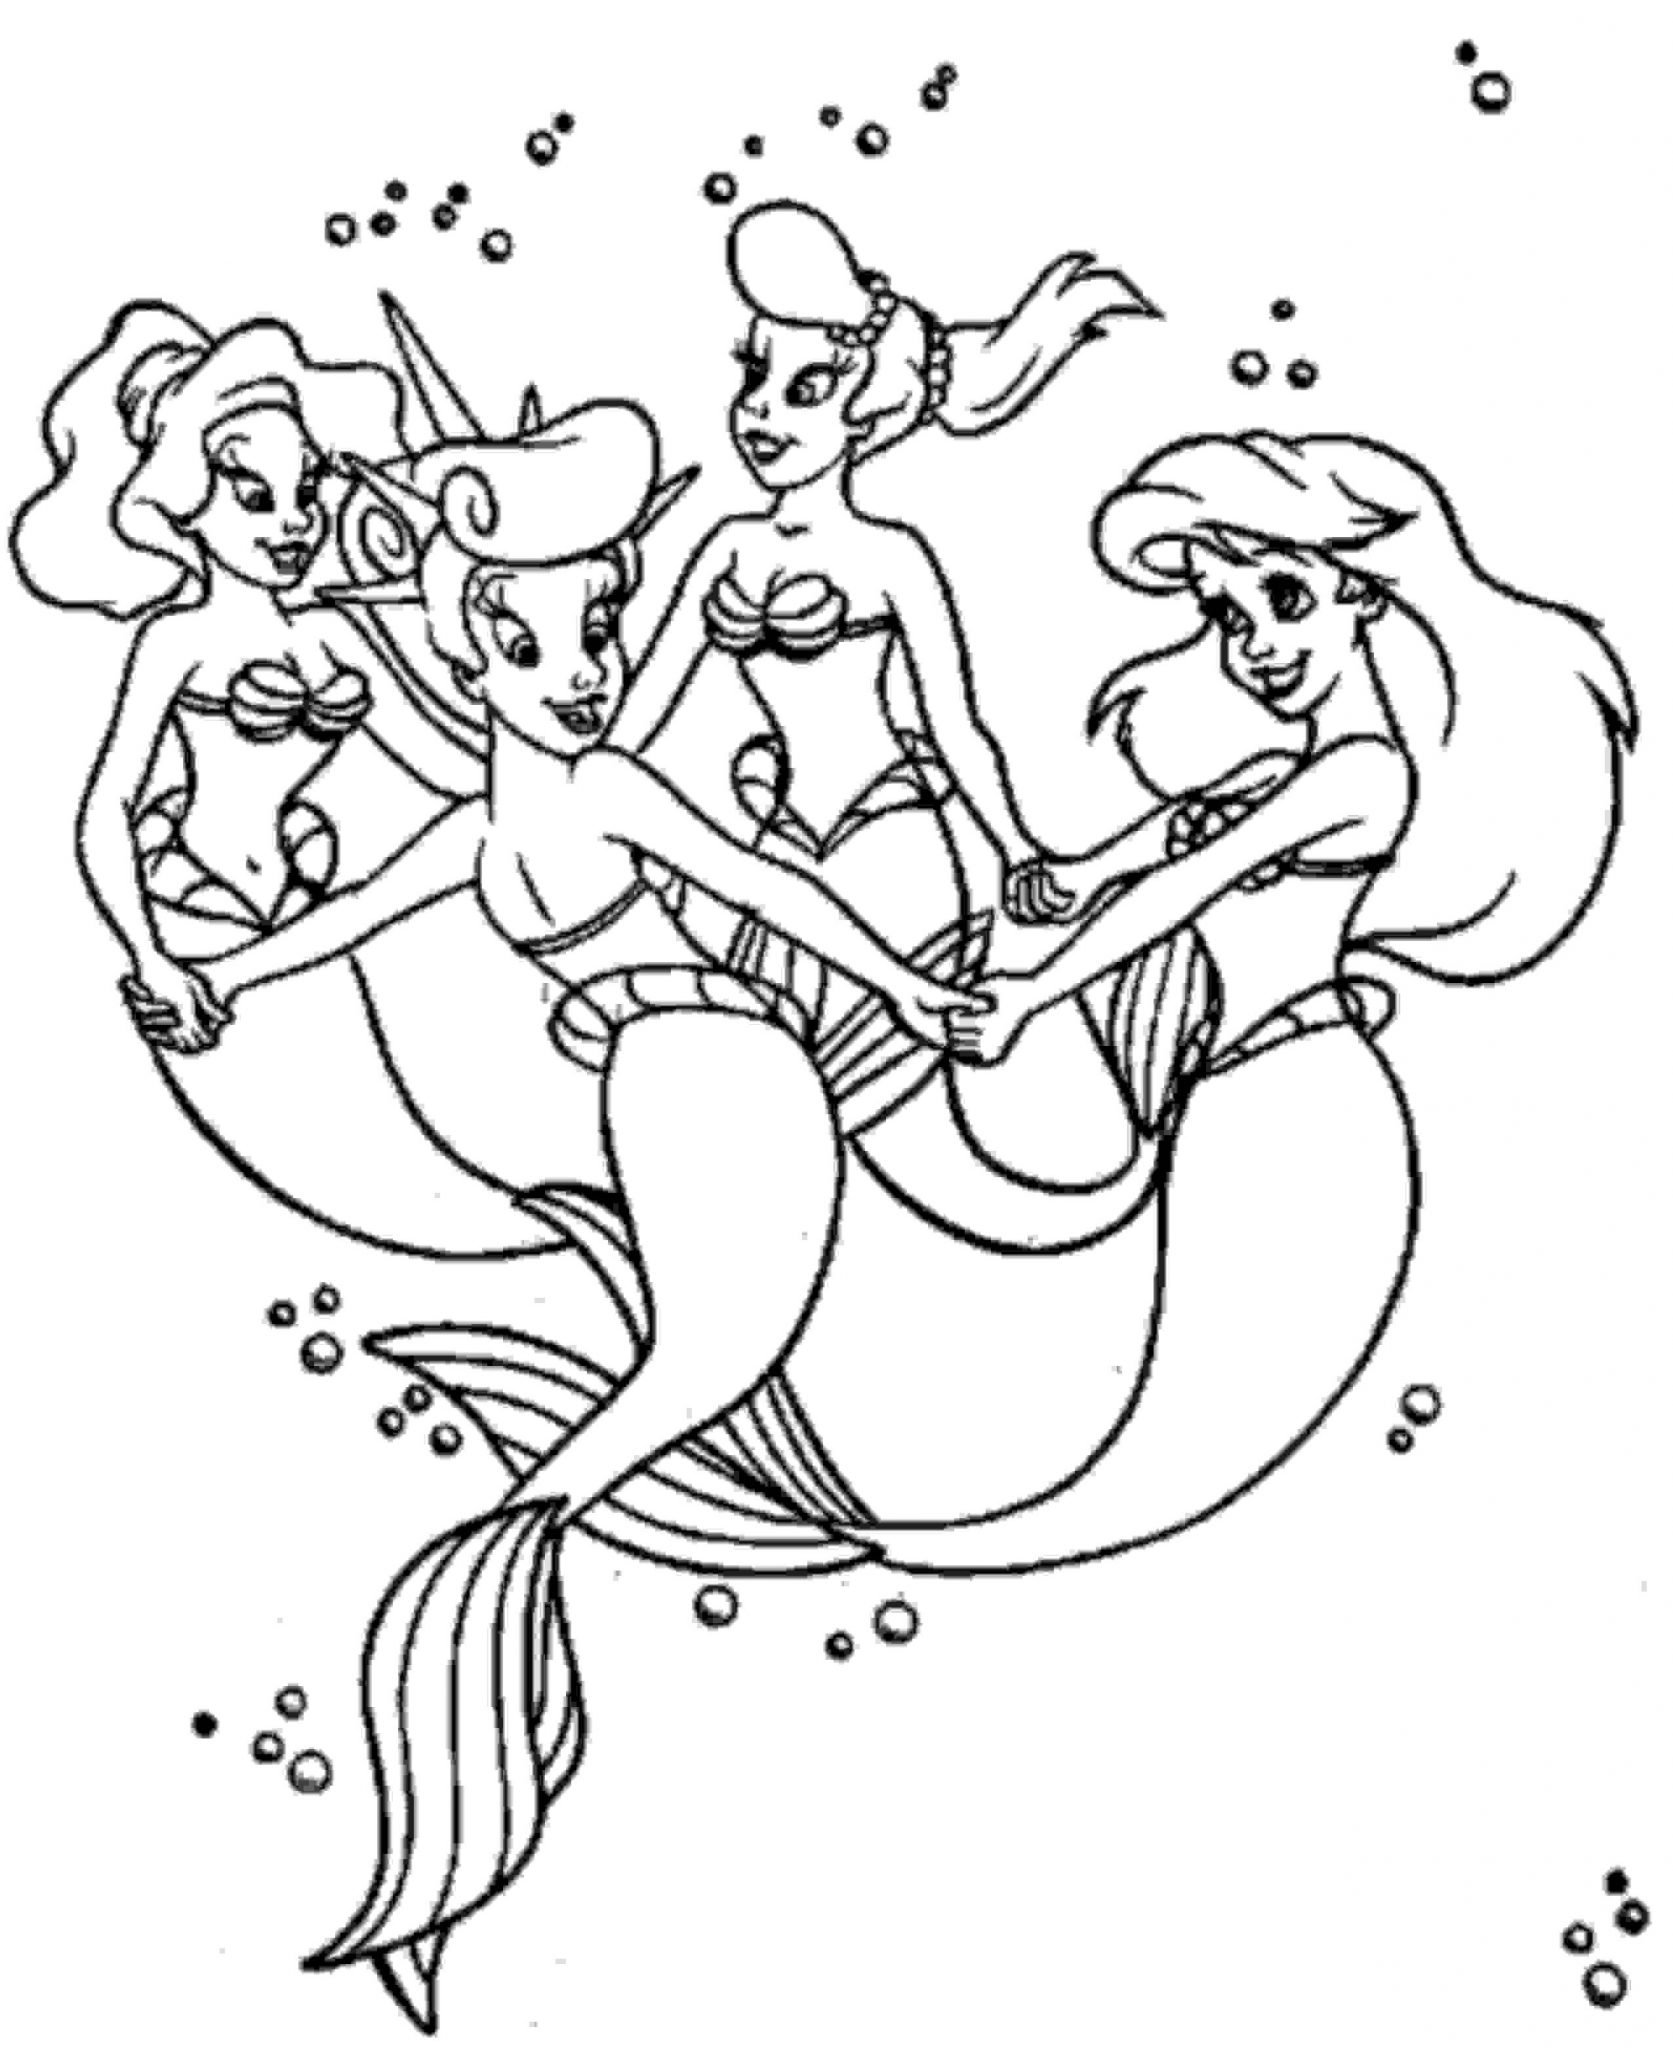 Print Download Find the Suitable Little Mermaid Coloring Pages for